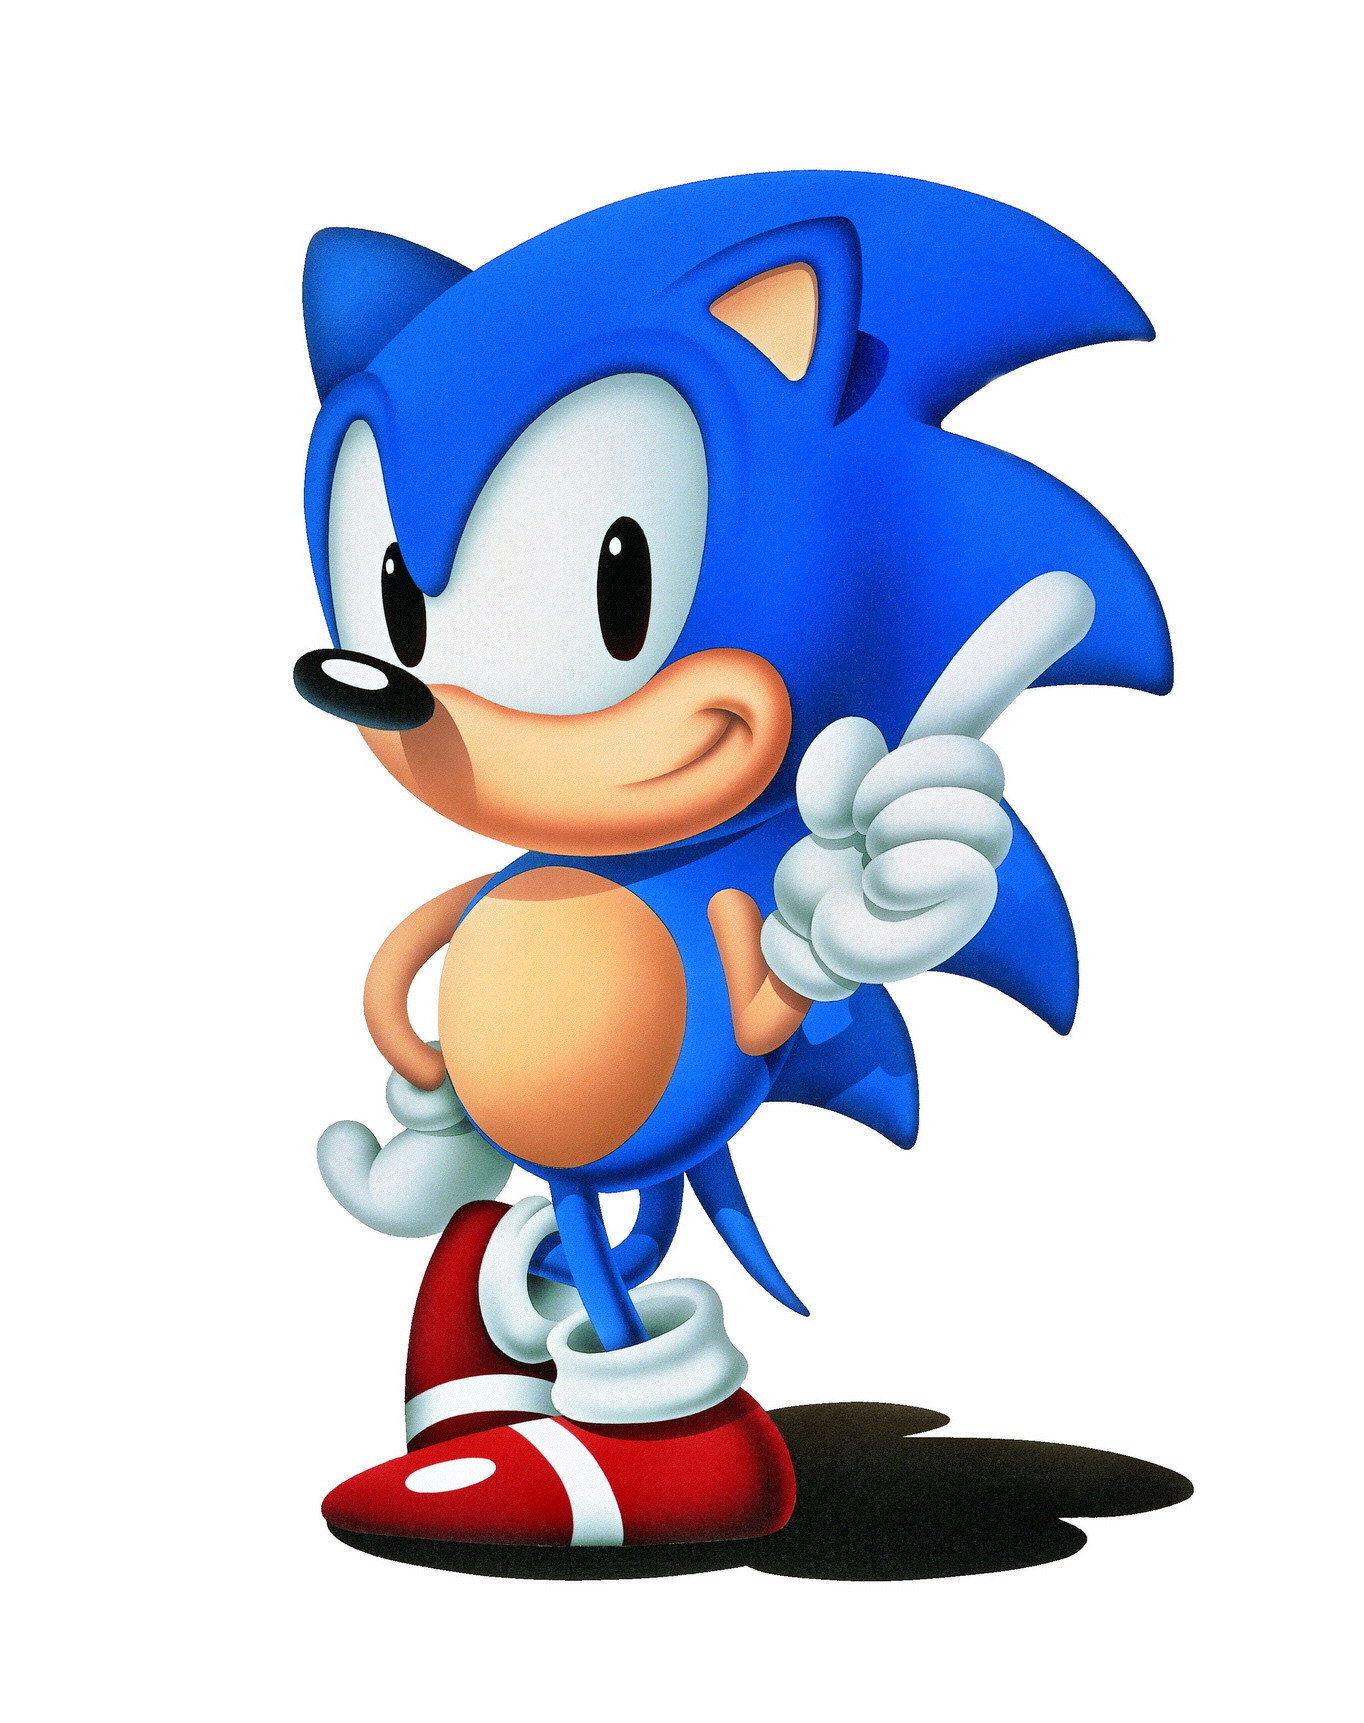 Sonic the hedgehog compilations